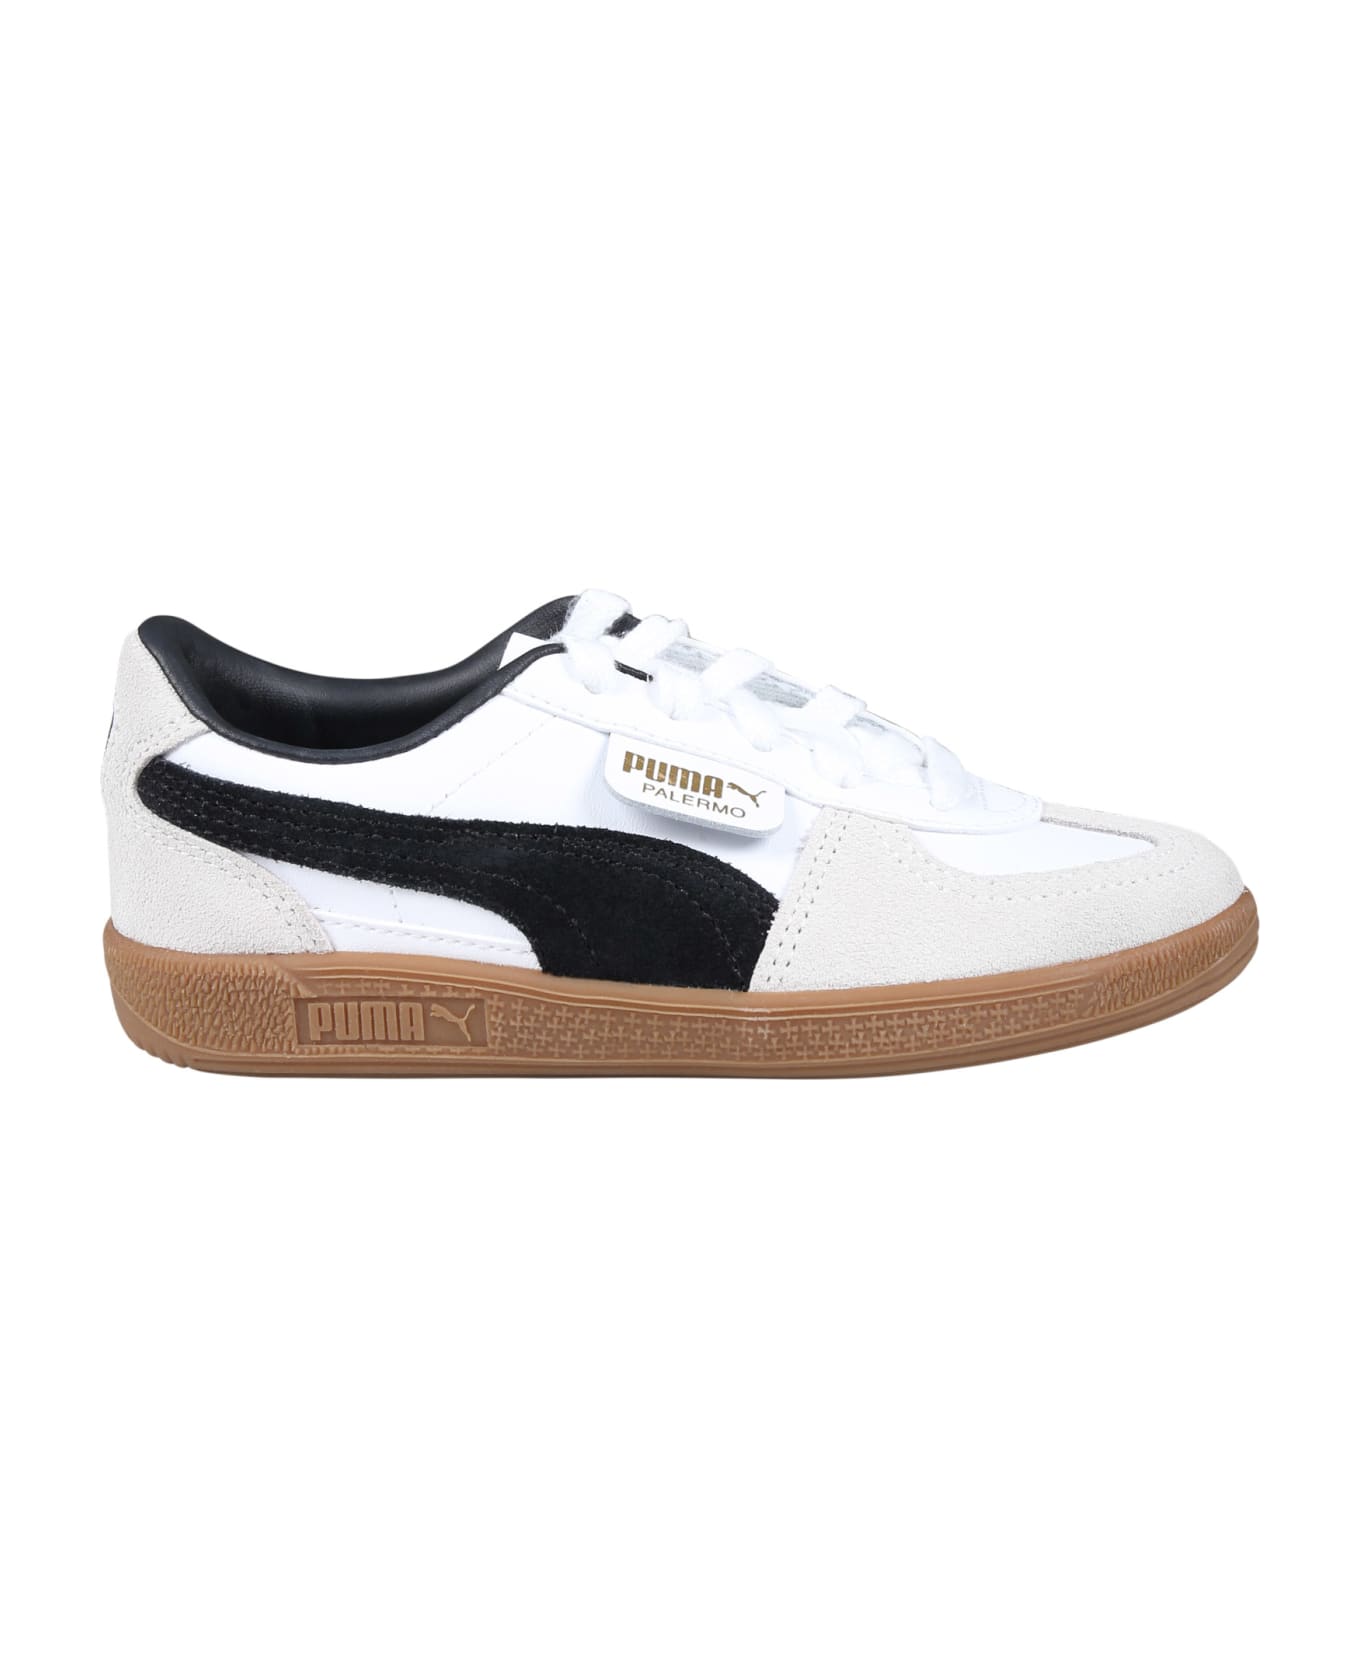 Puma Palermo Ps Light Blue Low Sneakers For Kids - White シューズ